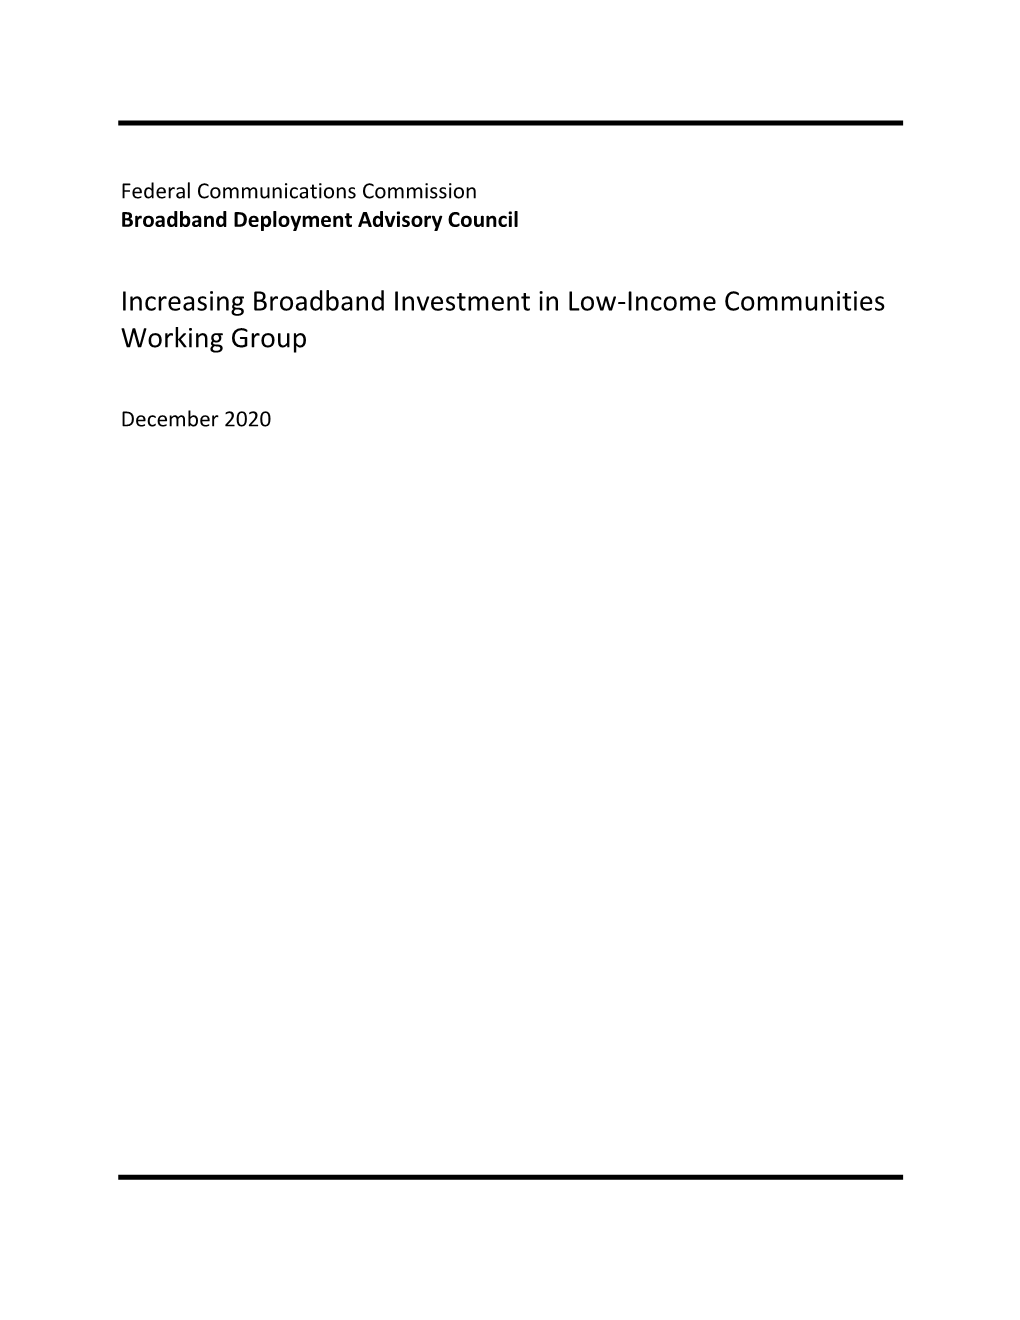 Increasing Broadband Investment in Low-Income Communities Working Group